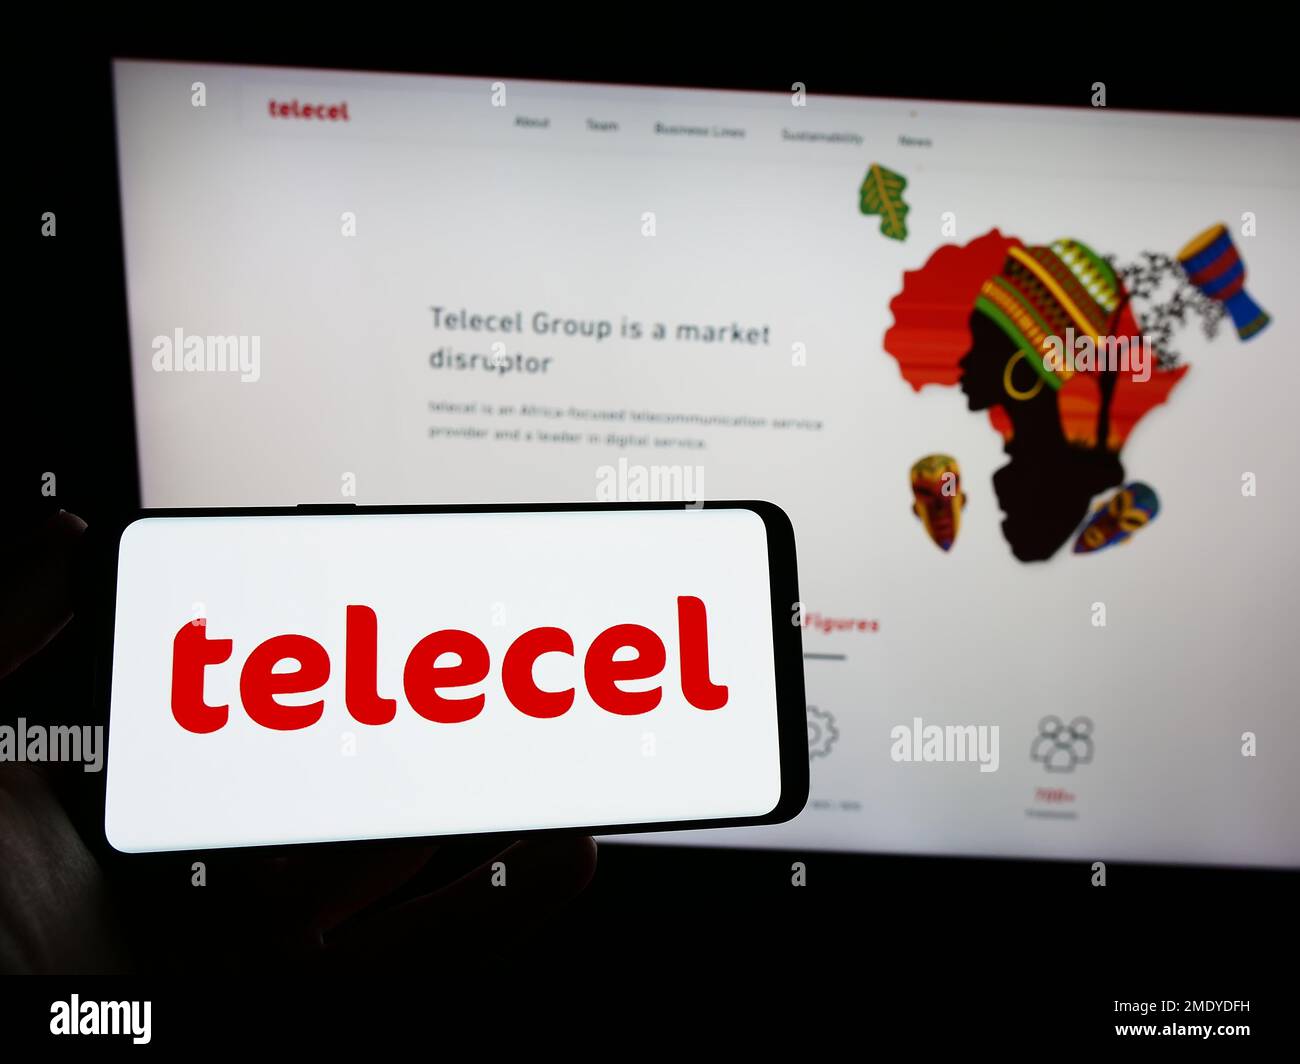 Person holding smartphone with logo of telecommunications company Telecel Group on screen in front of website. Focus on phone display. Stock Photo